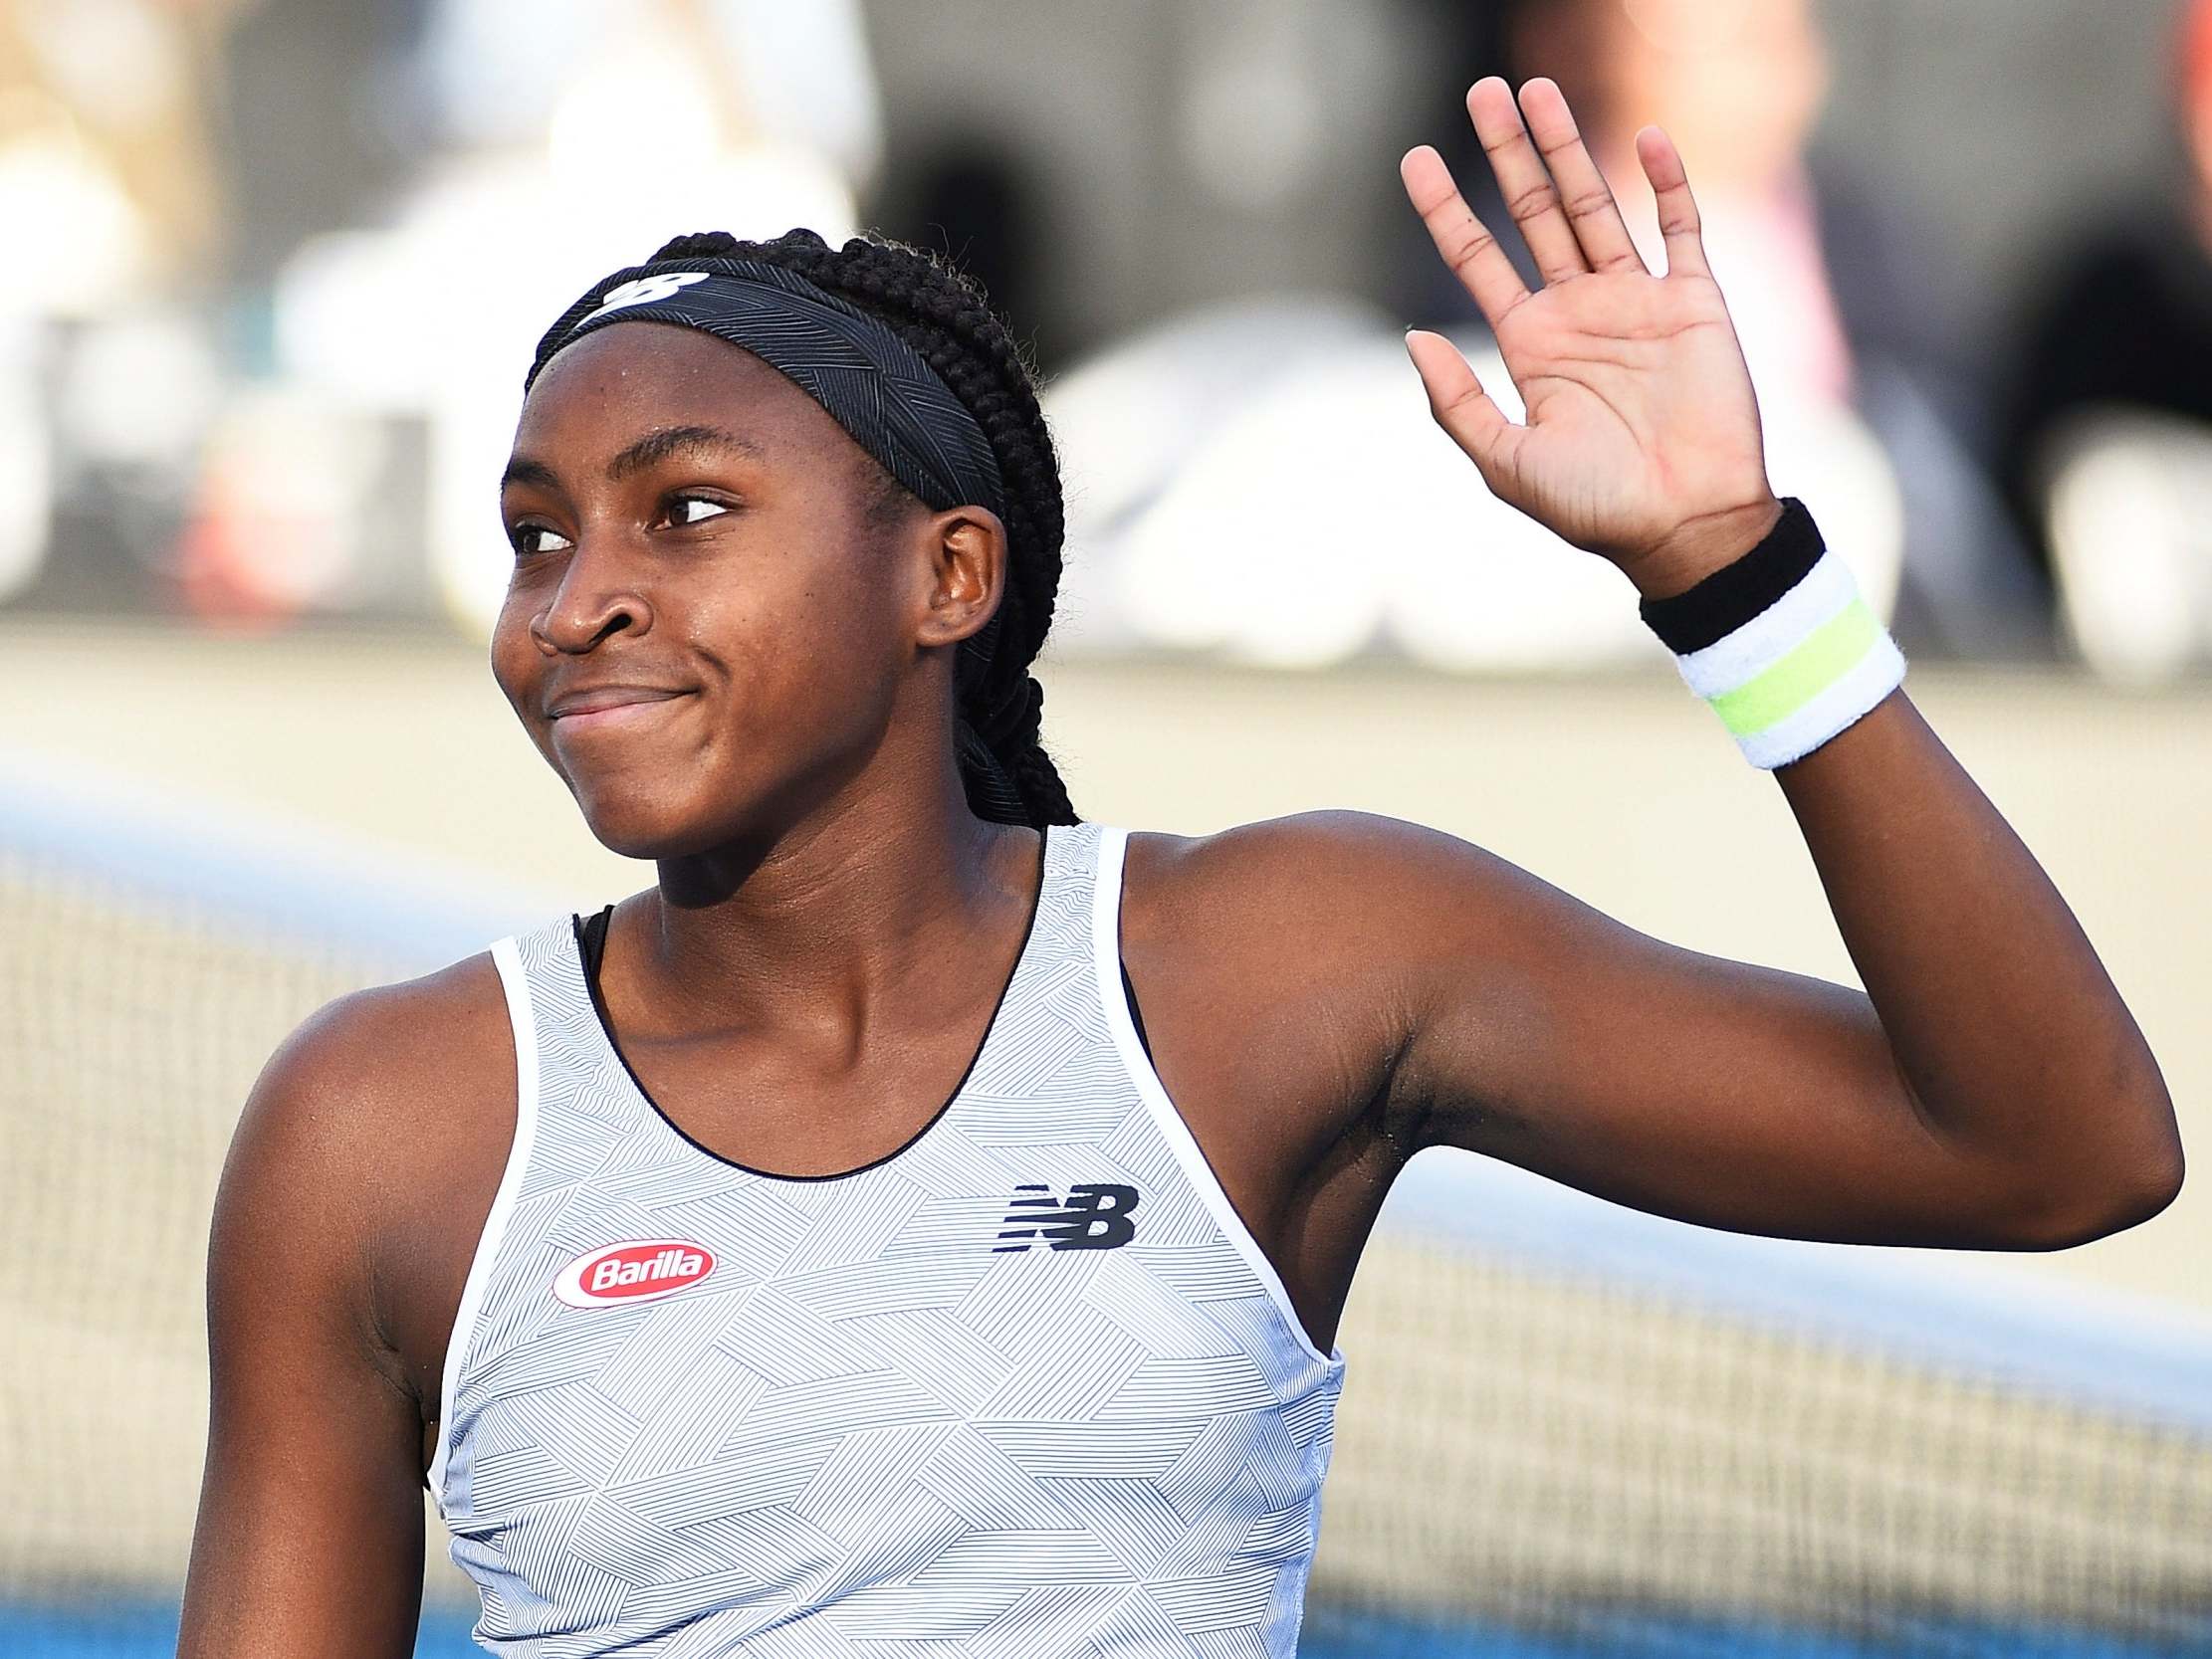 Coco Gauff admonished her father after he cursed when talking to her during the defeat by Laura Siegemund